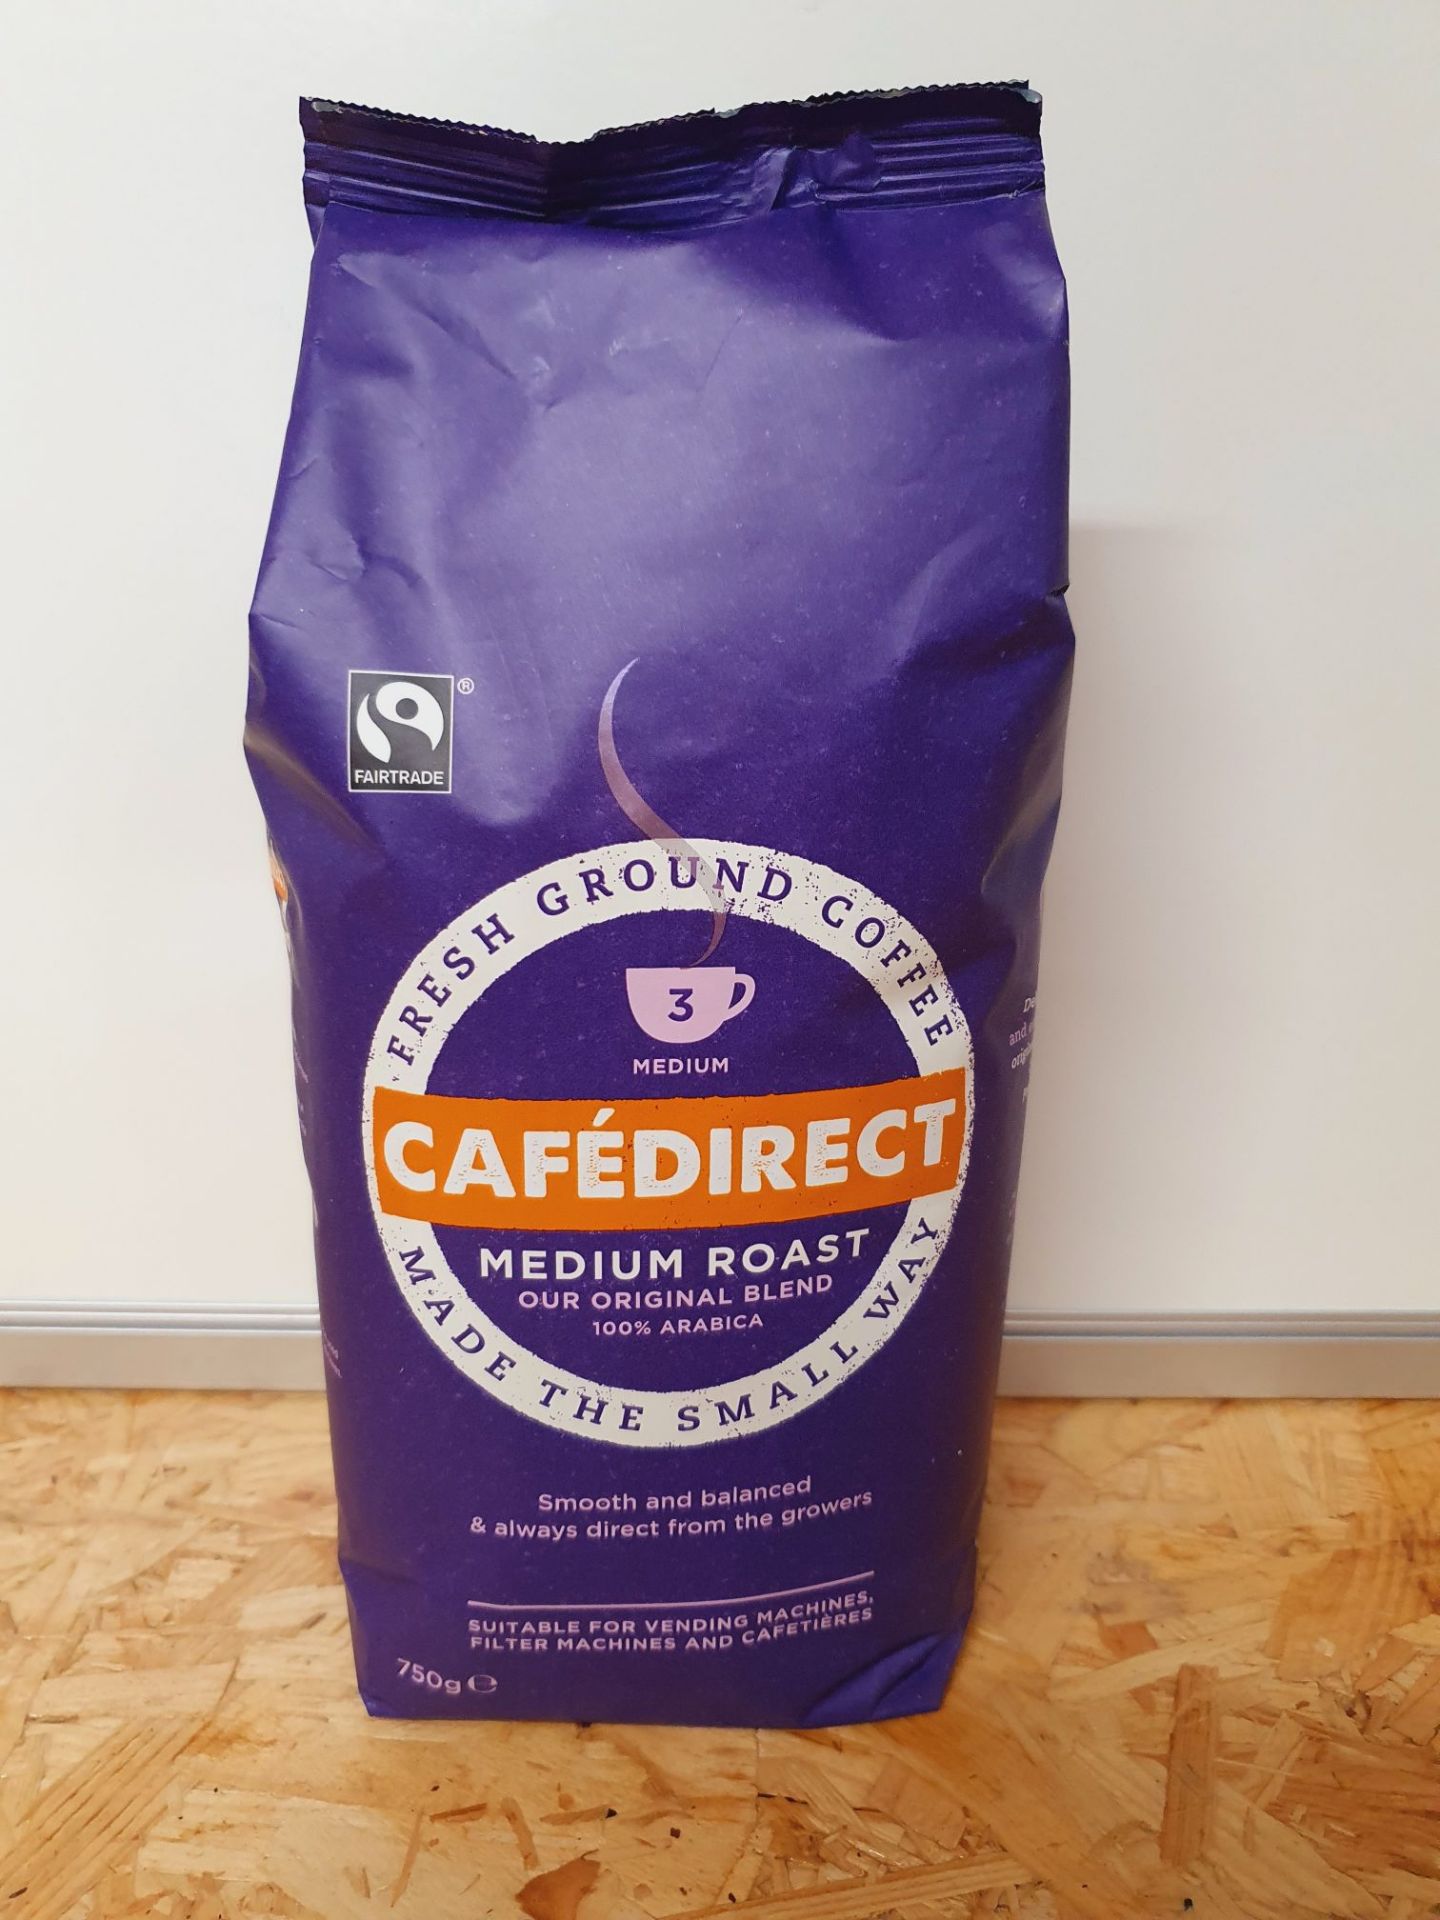 ONE LOT TO CONTAIN ONE BAG OF CAFÉ DIRECT MEDIUM ROAST COFFEE. 750G. BEST BEFORE FEB 2021